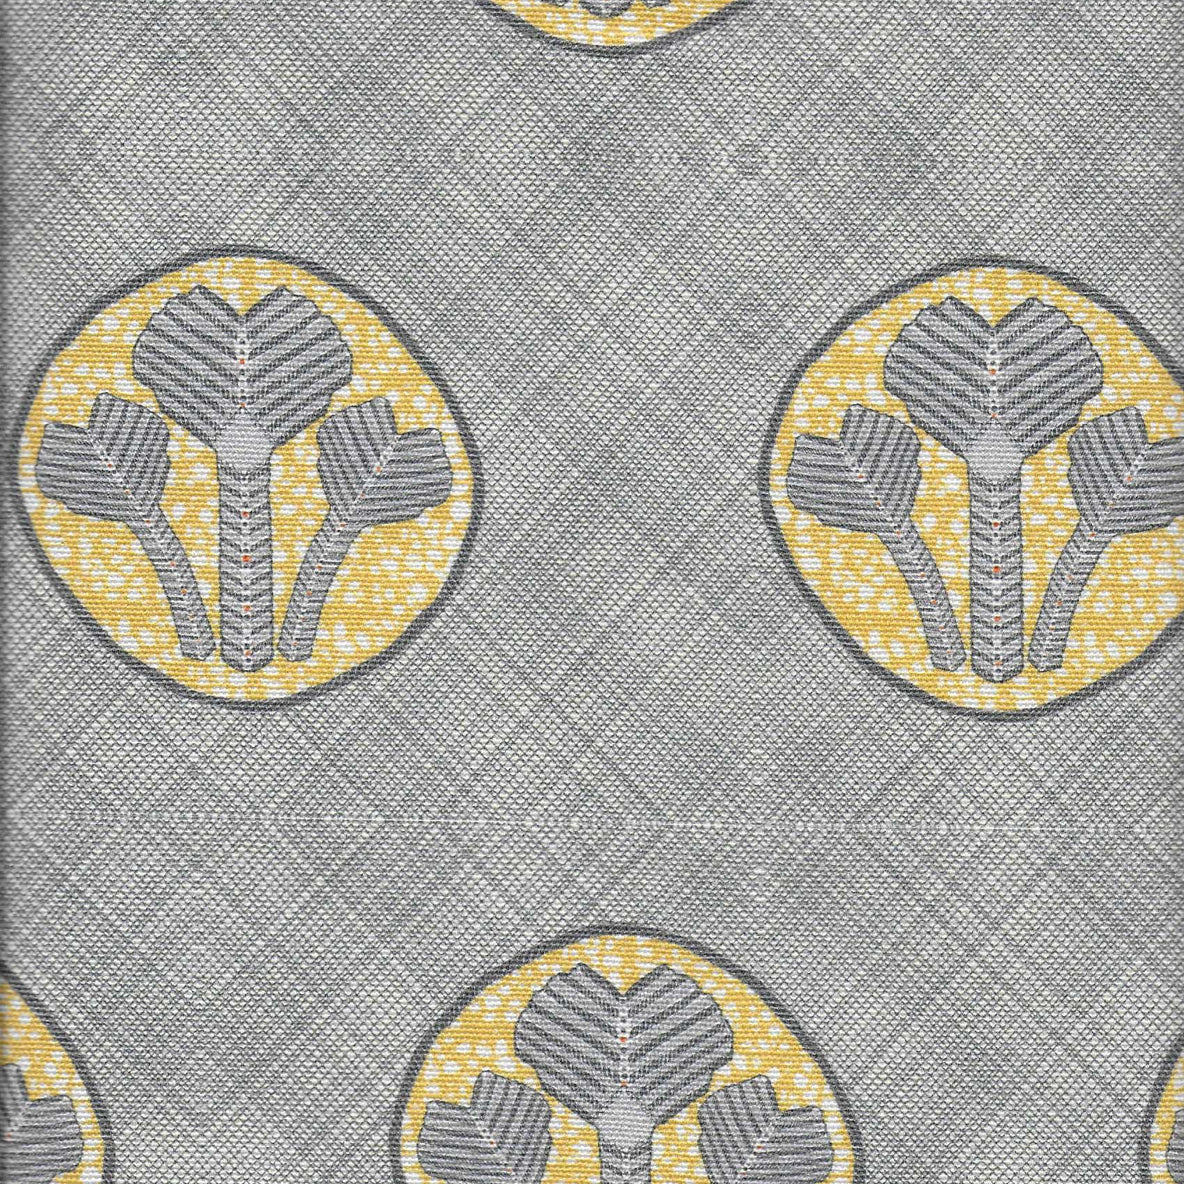 Detail of fabric in a repeating curvilinear floral print in yellow and gray on a gray field.